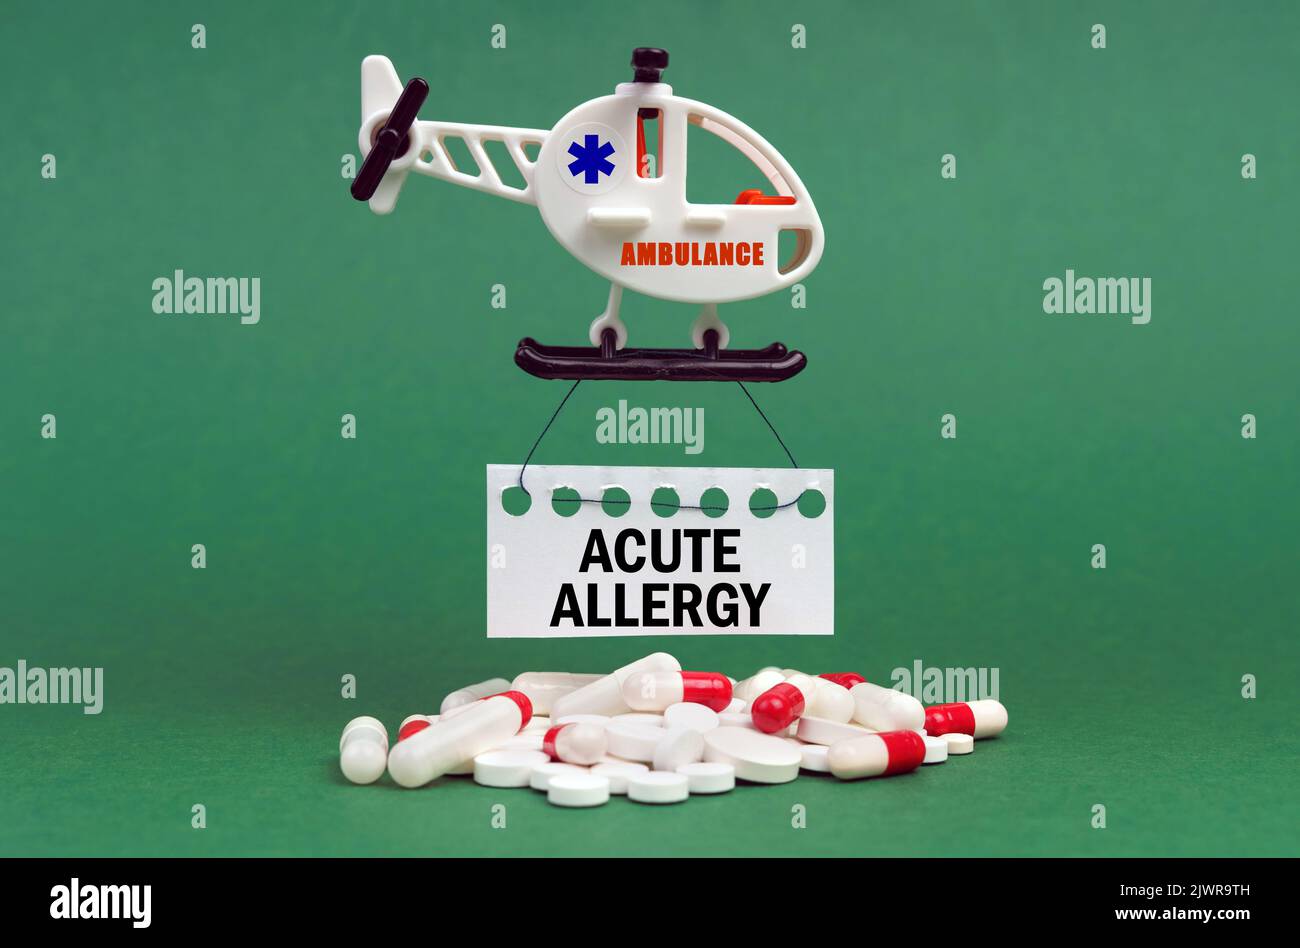 Medical concept. On a green surface, an ambulance helicopter, pills and ...